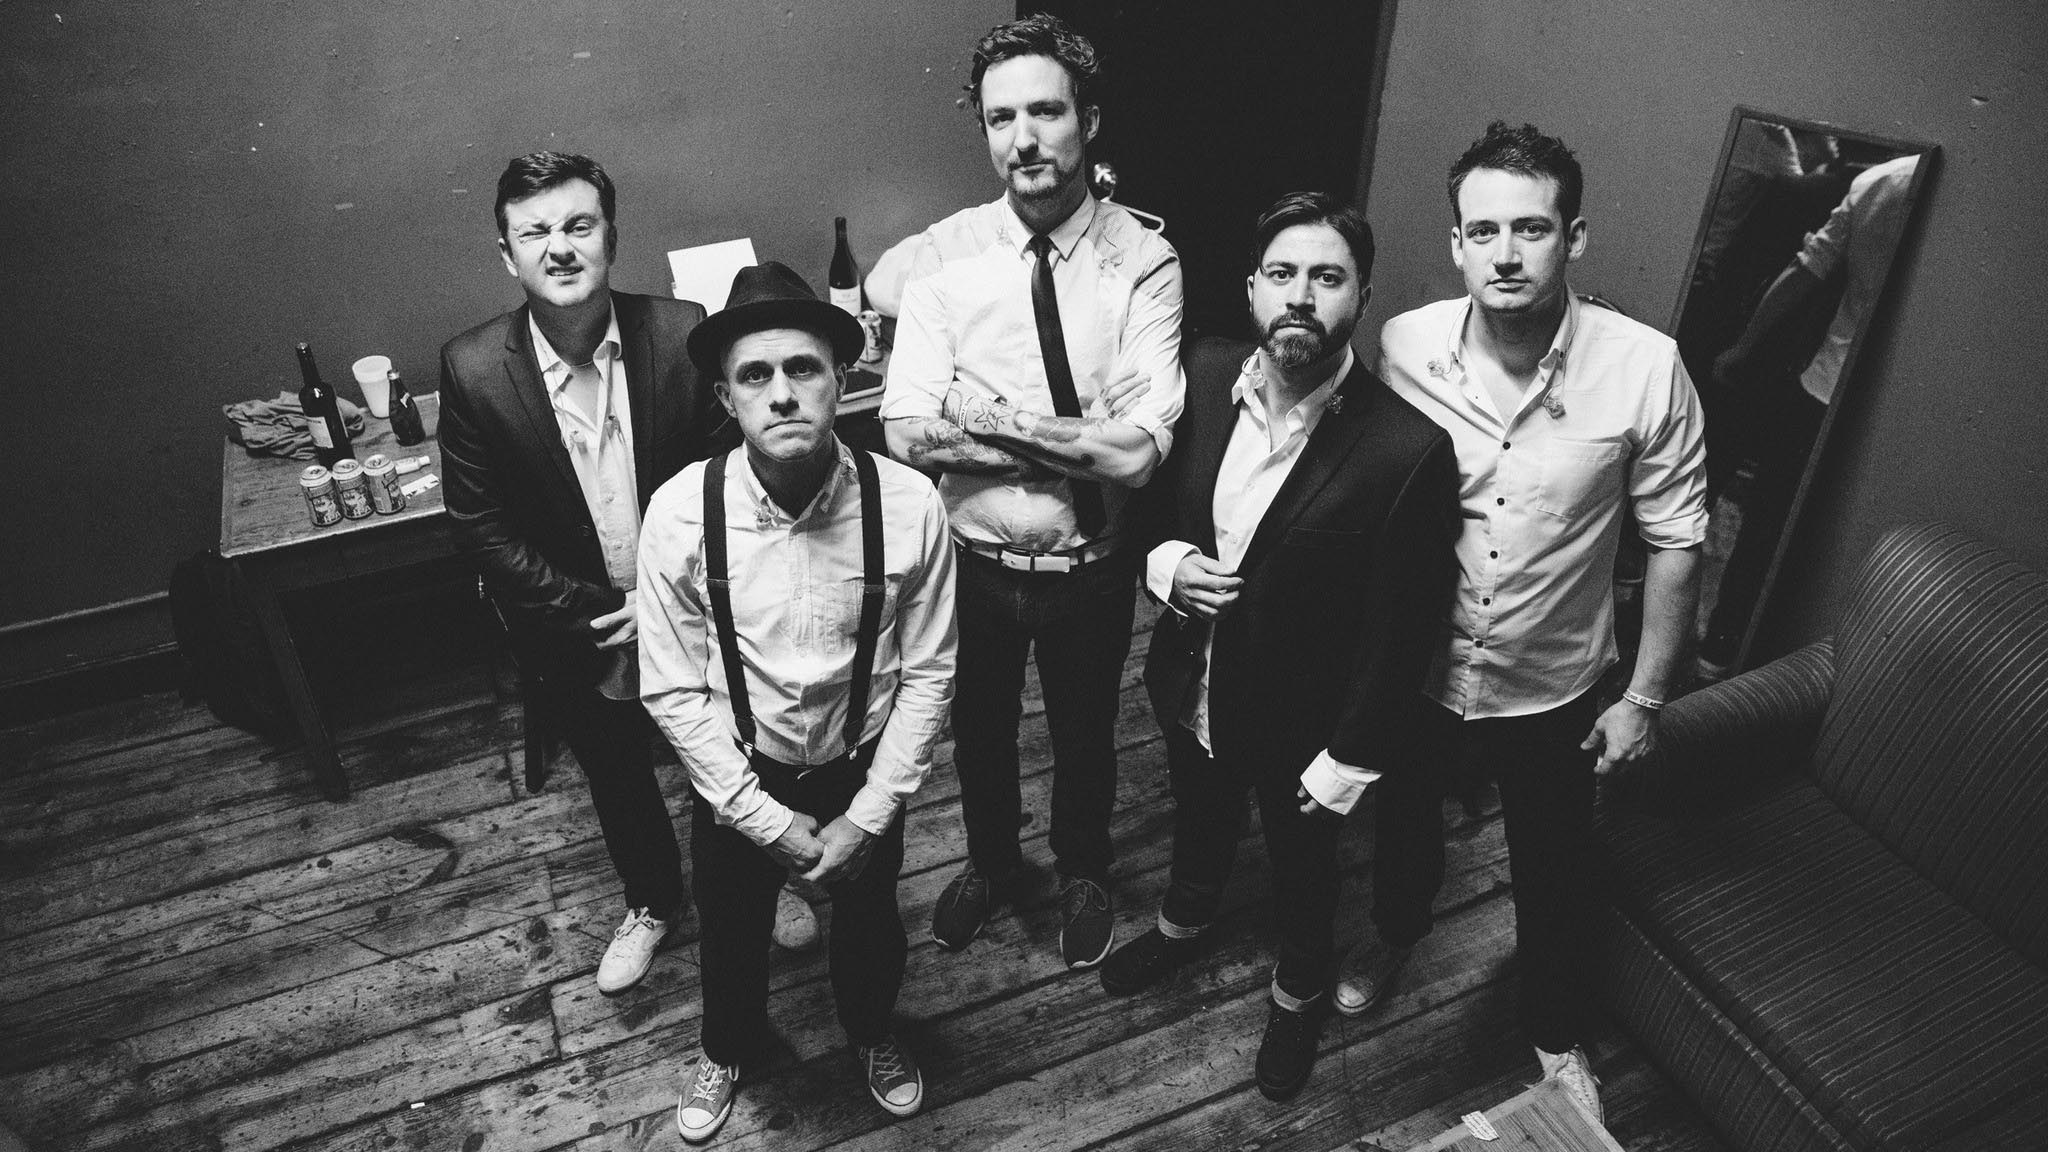 Frank Turner and The Sleeping Souls